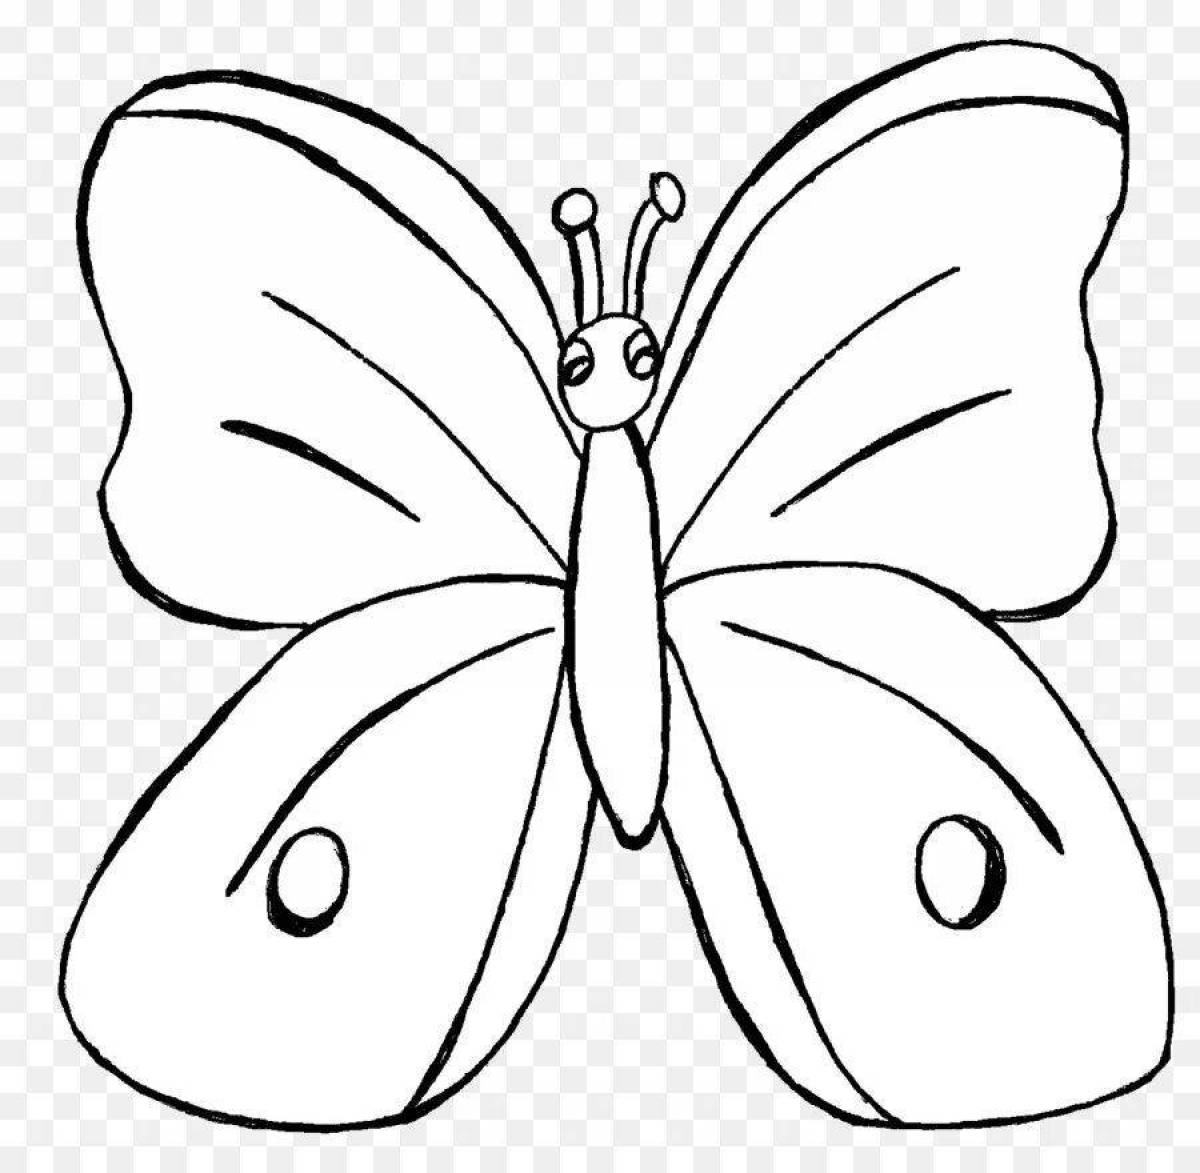 Brightly colored large butterfly coloring book